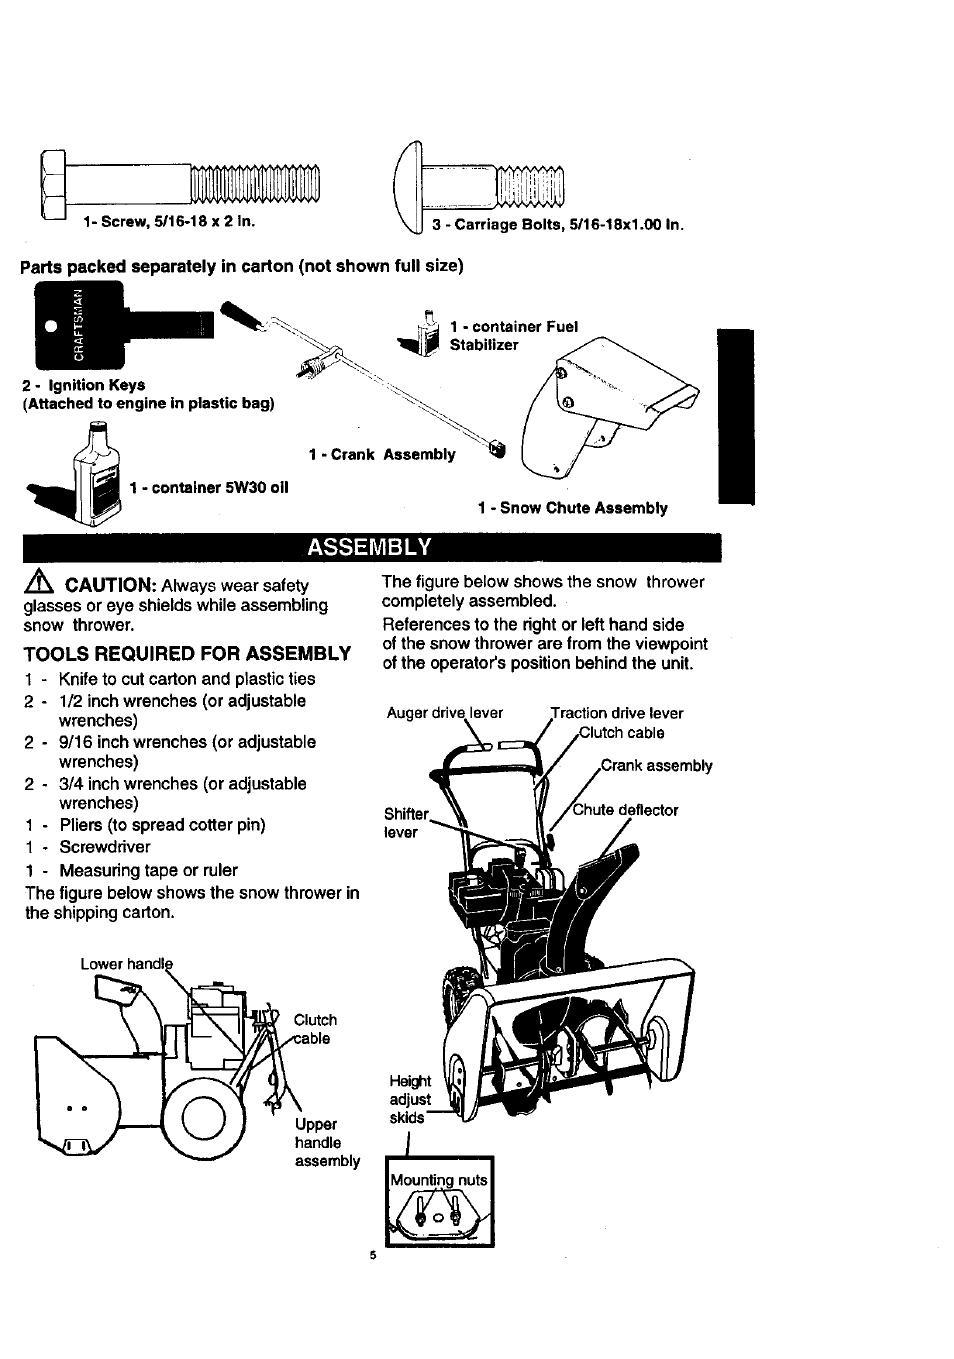 Tools required for assembly | Craftsman 536.886140 User Manual | Page 5